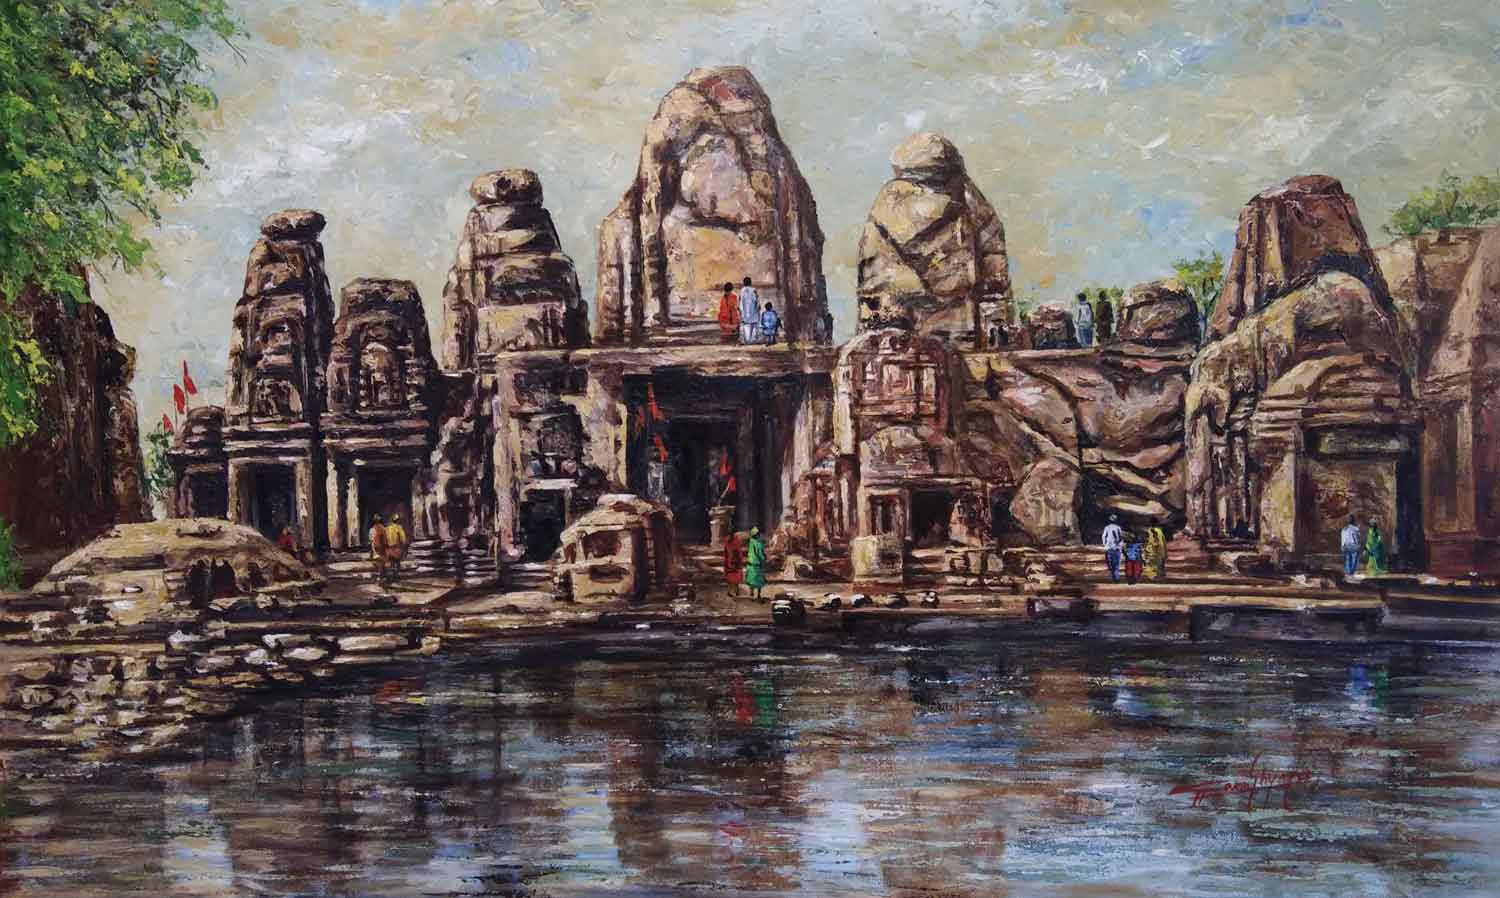 Realism Painting with Acrylic on Canvas "Masrur Temple" art by Ghanshyam Kashyap